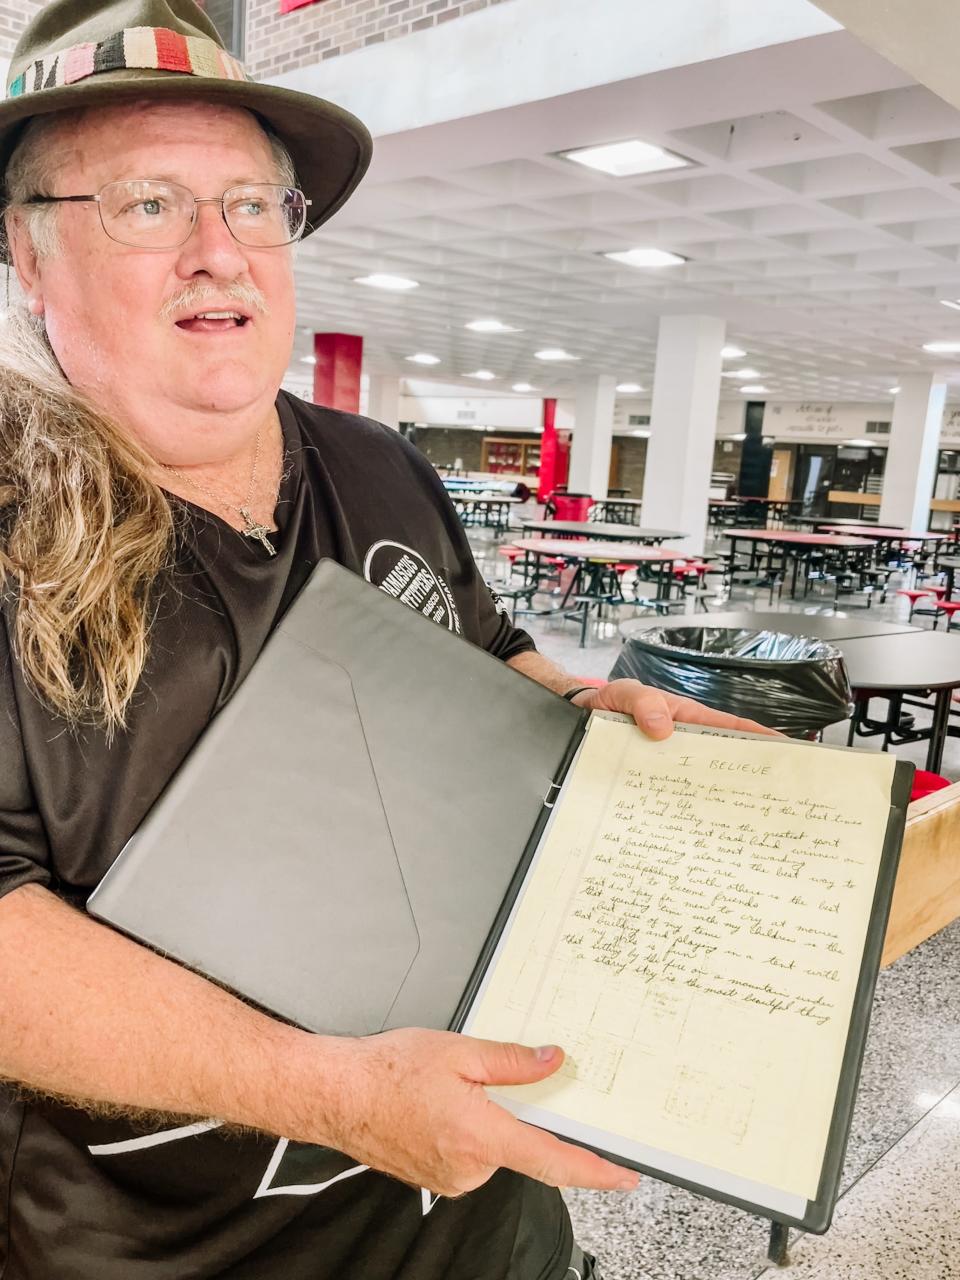 Gordon Sisk was the social studies department chair when J.D. Lambert taught economics at Central. Lambert would get his students to write “I believe” on notepaper and list their principles and beliefs. “I copied the idea and still have my own,” Sisk said at the schoolwide celebration.